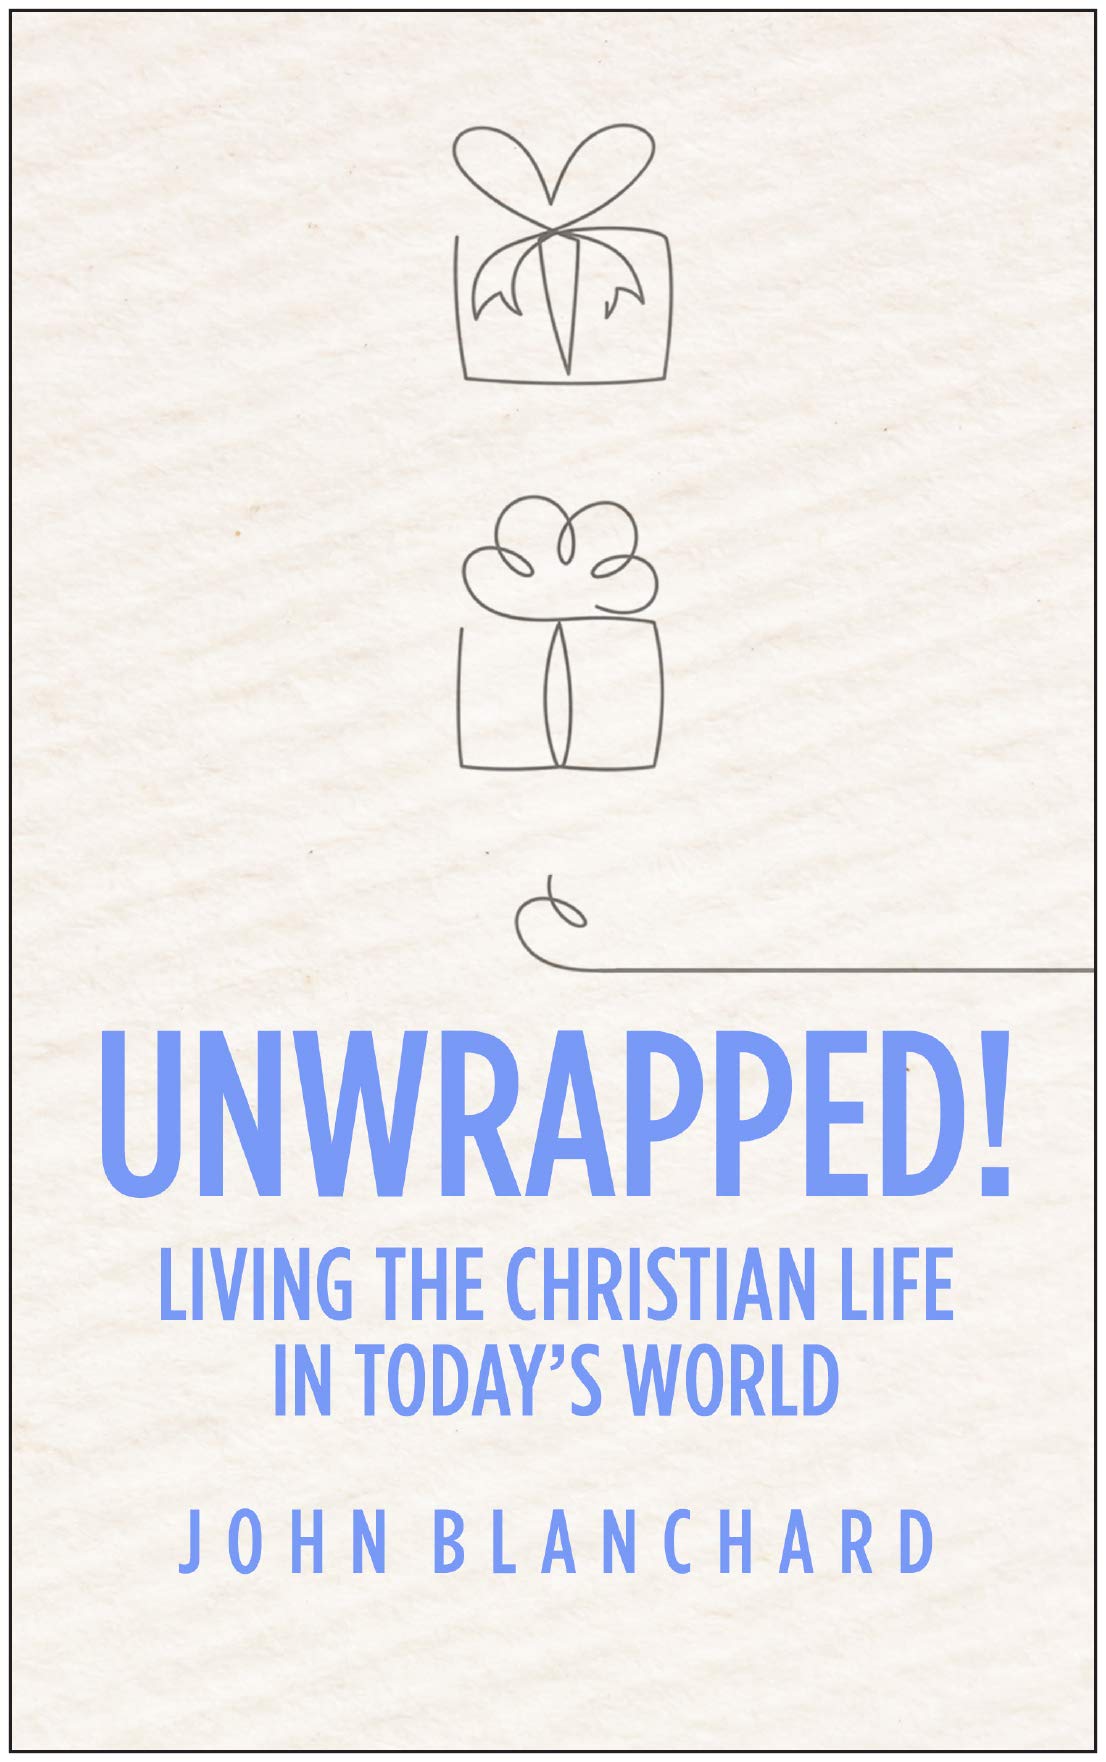 Book Notice: UNWRAPPED! LIVING THE CHRISTIAN LIFE IN TODAY’S WORLD, by John Blanchard